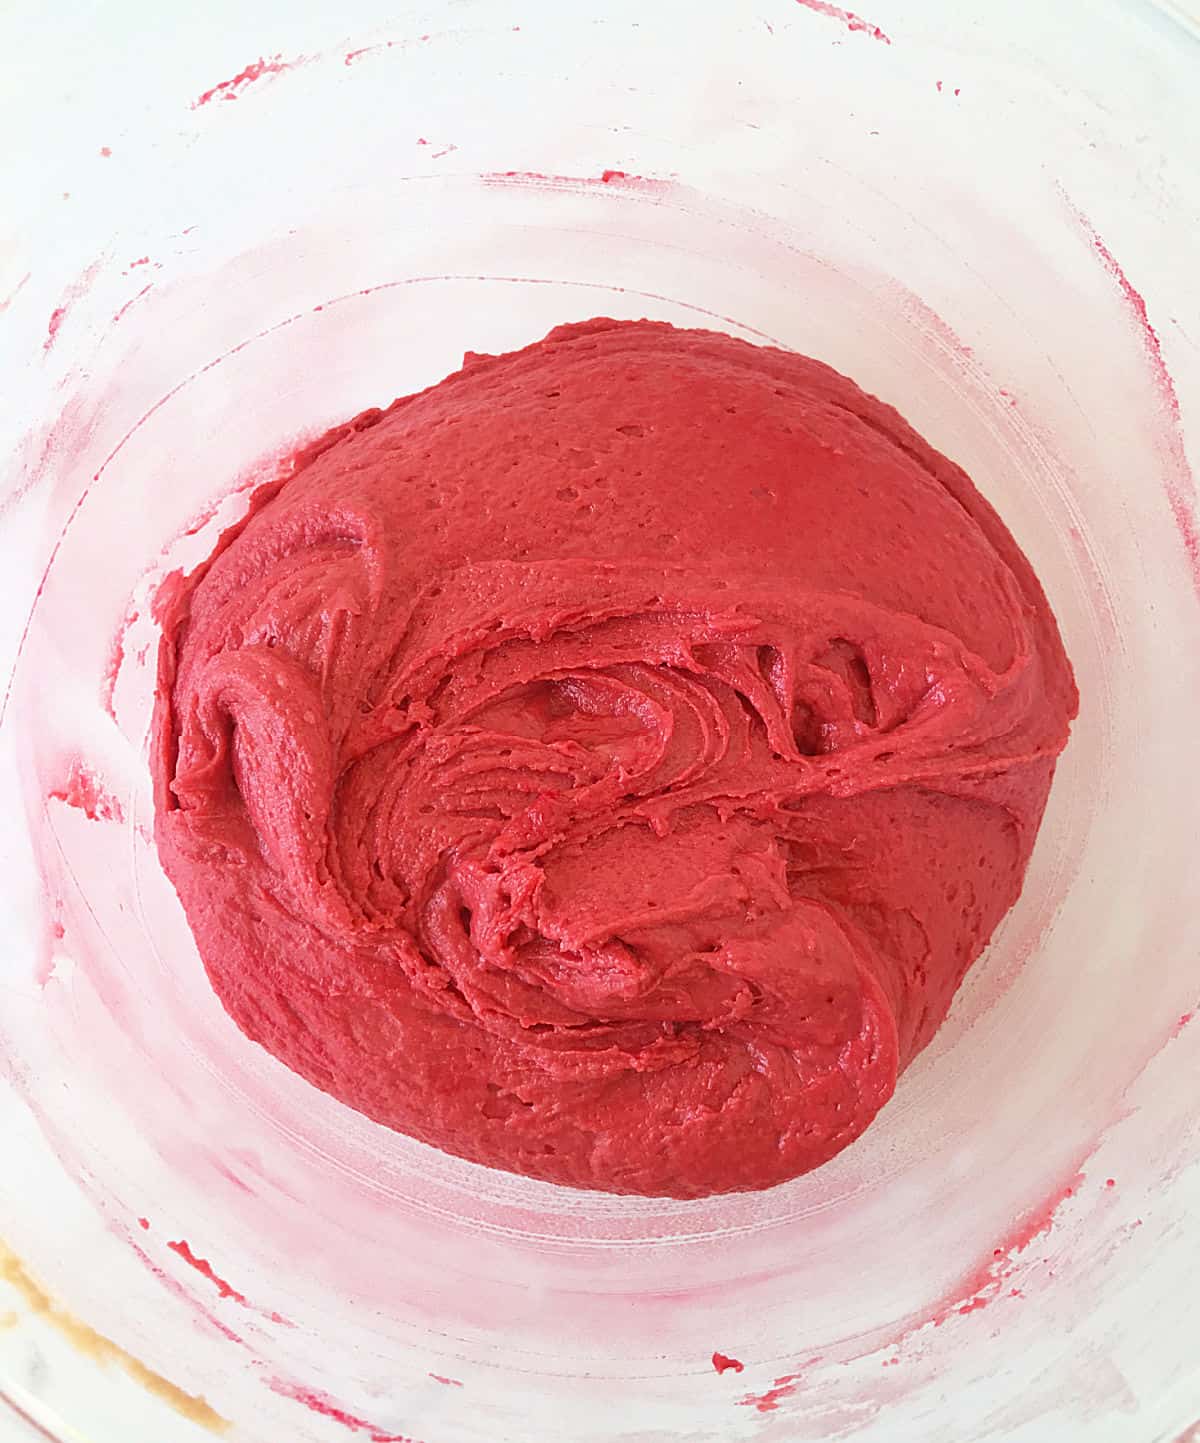 Red colored batter in a glass bowl